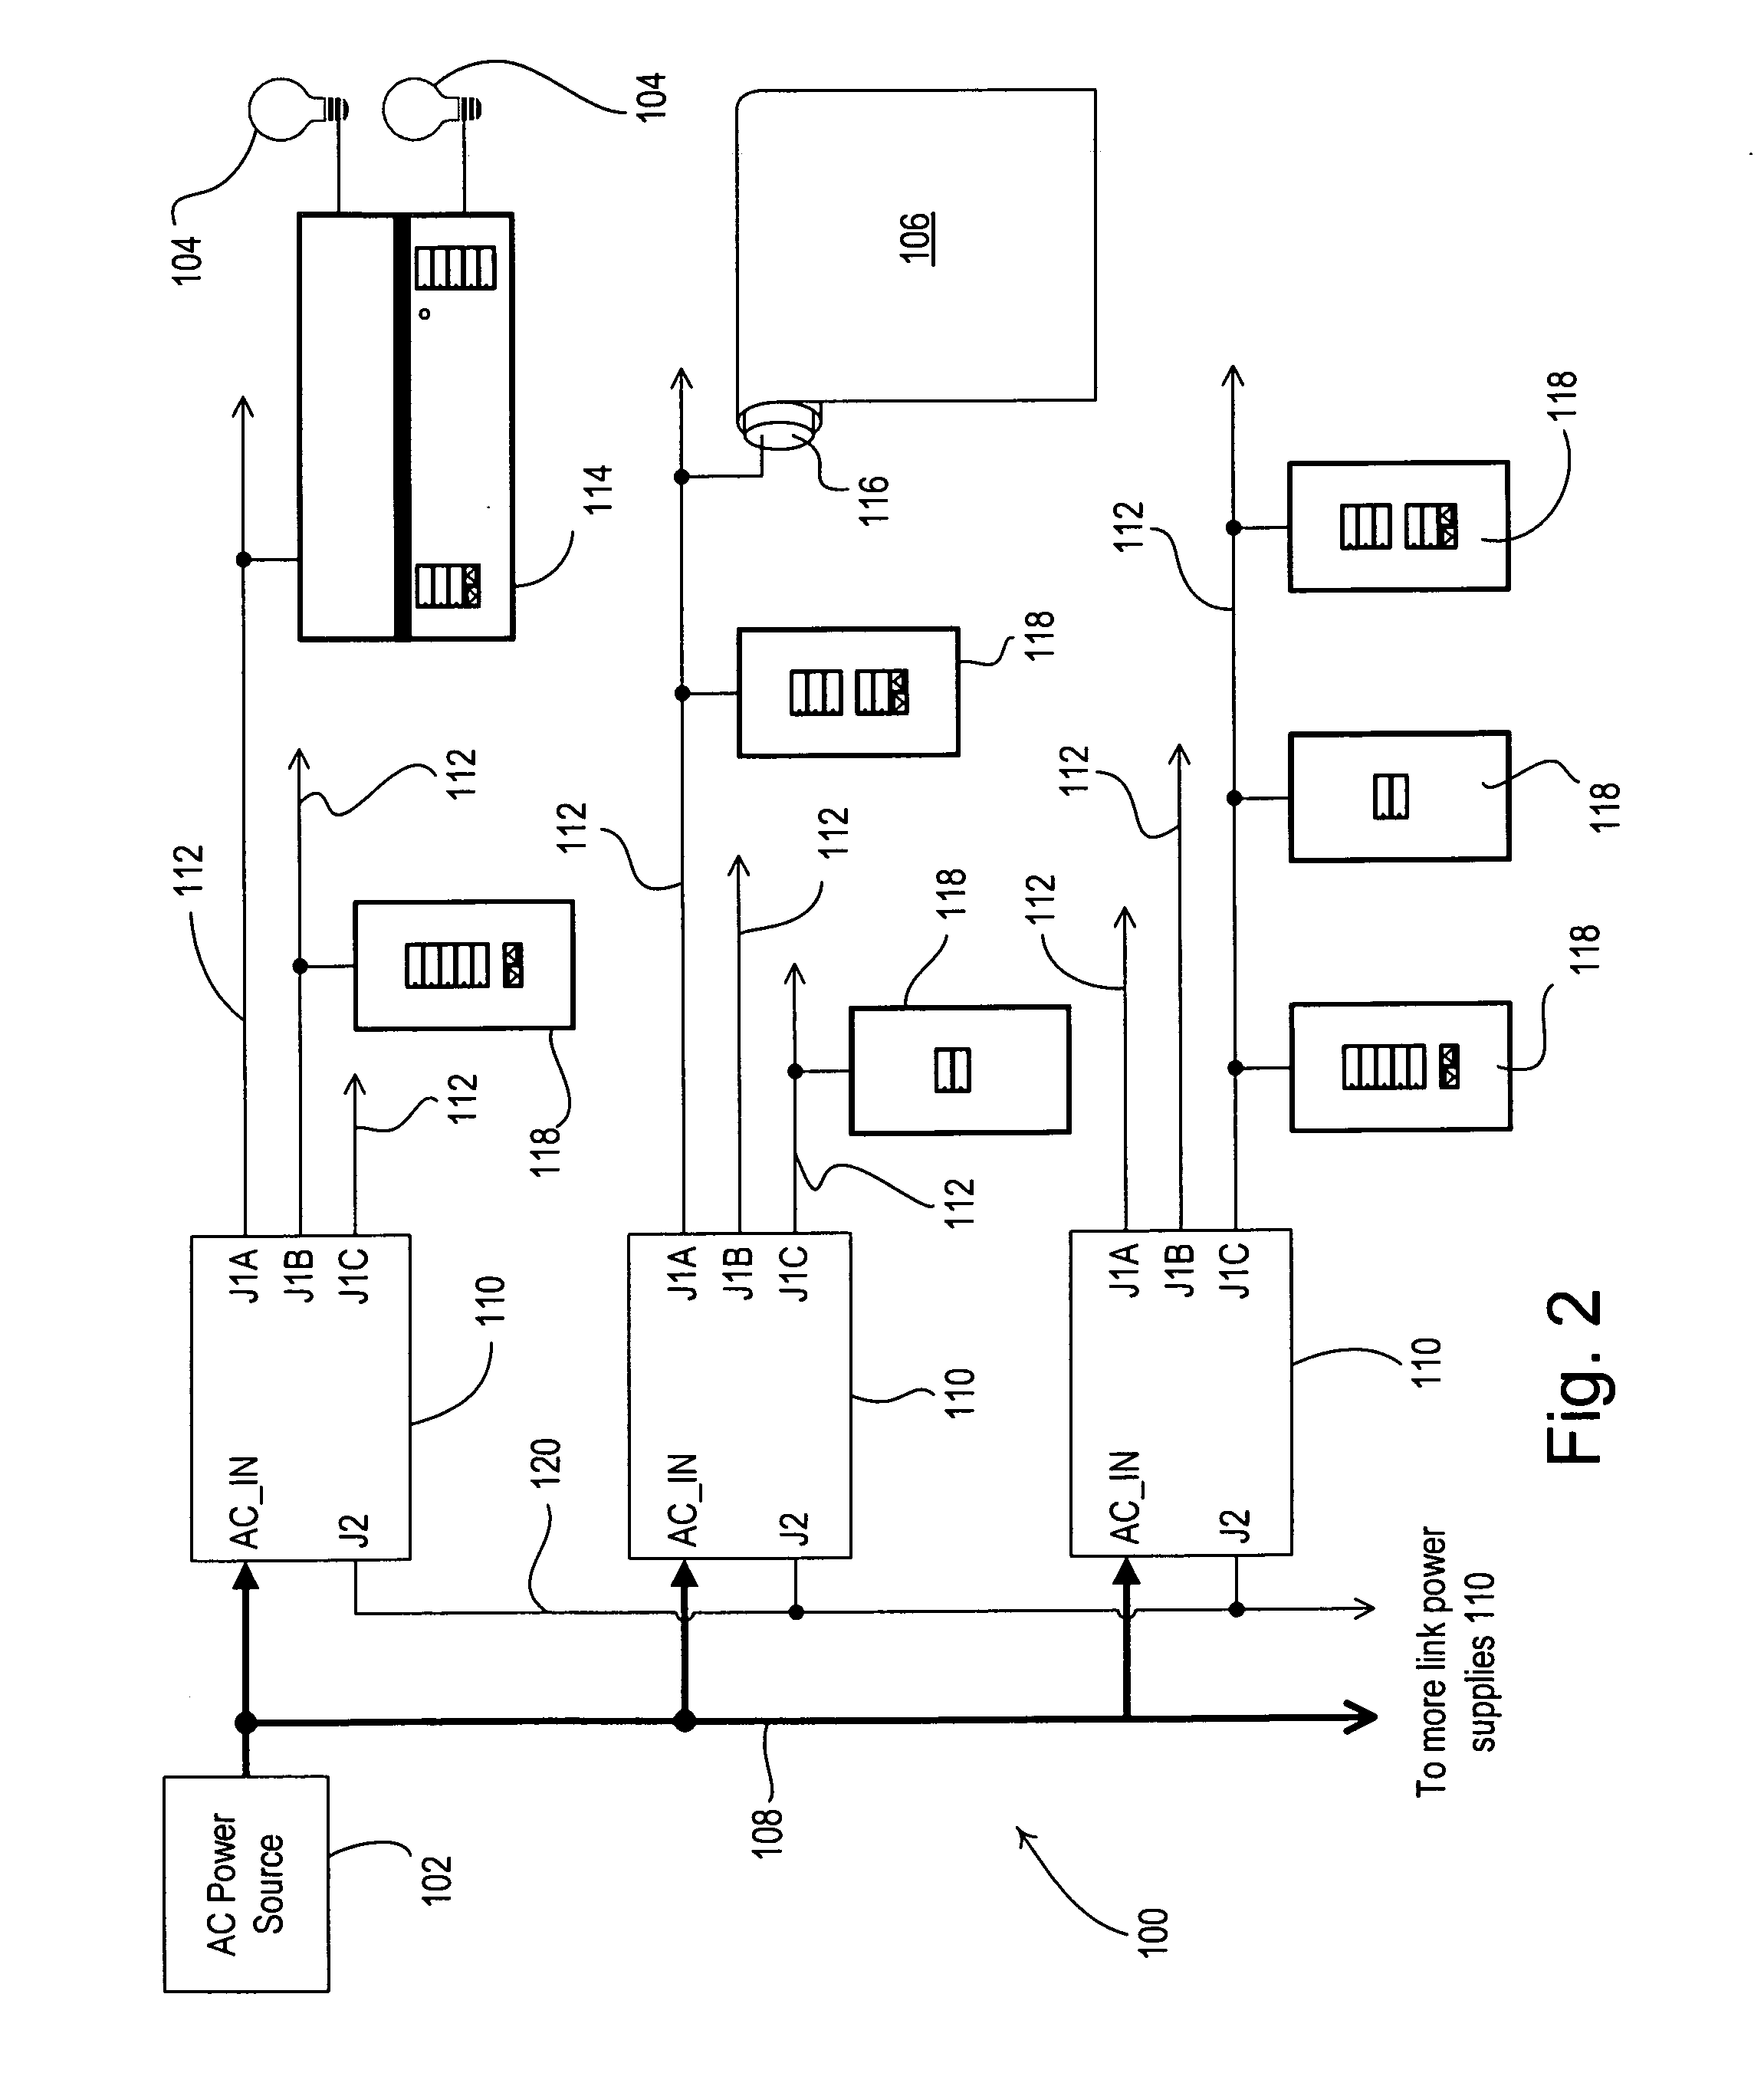 Load control system having a plurality of repeater devices